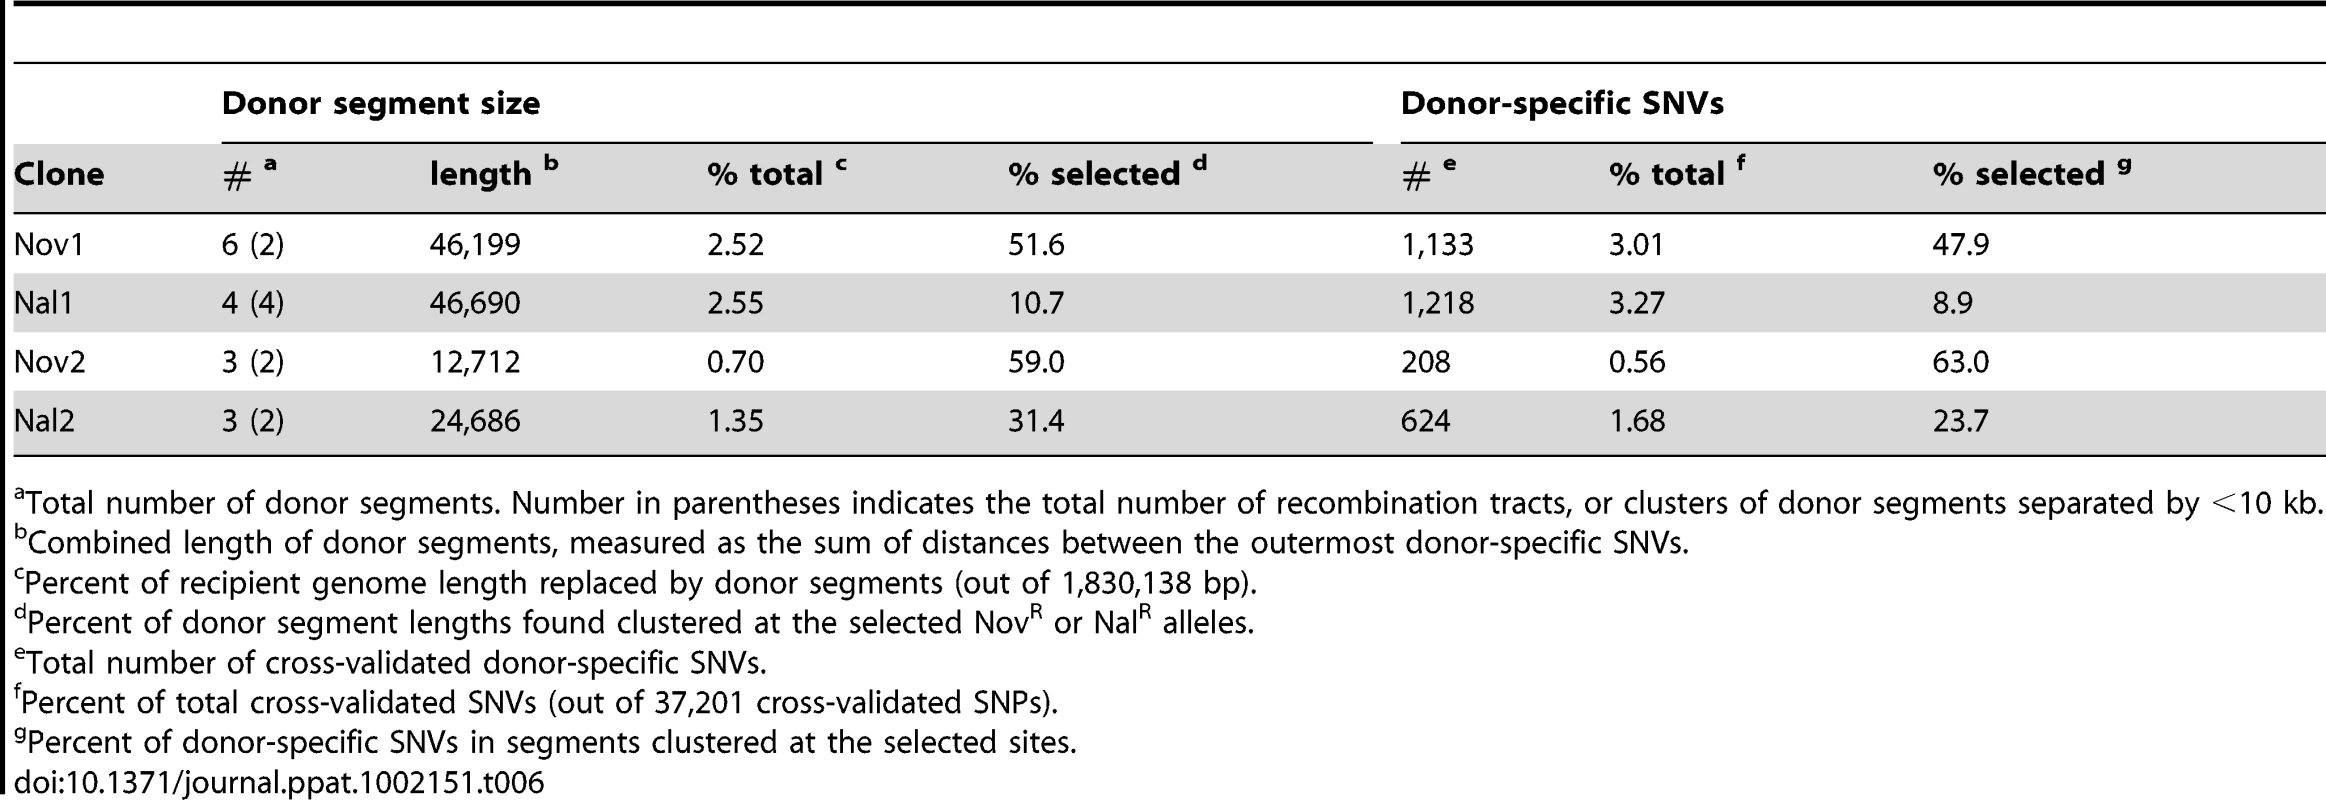 Summary of transforming donor DNA in 4 recombinants.